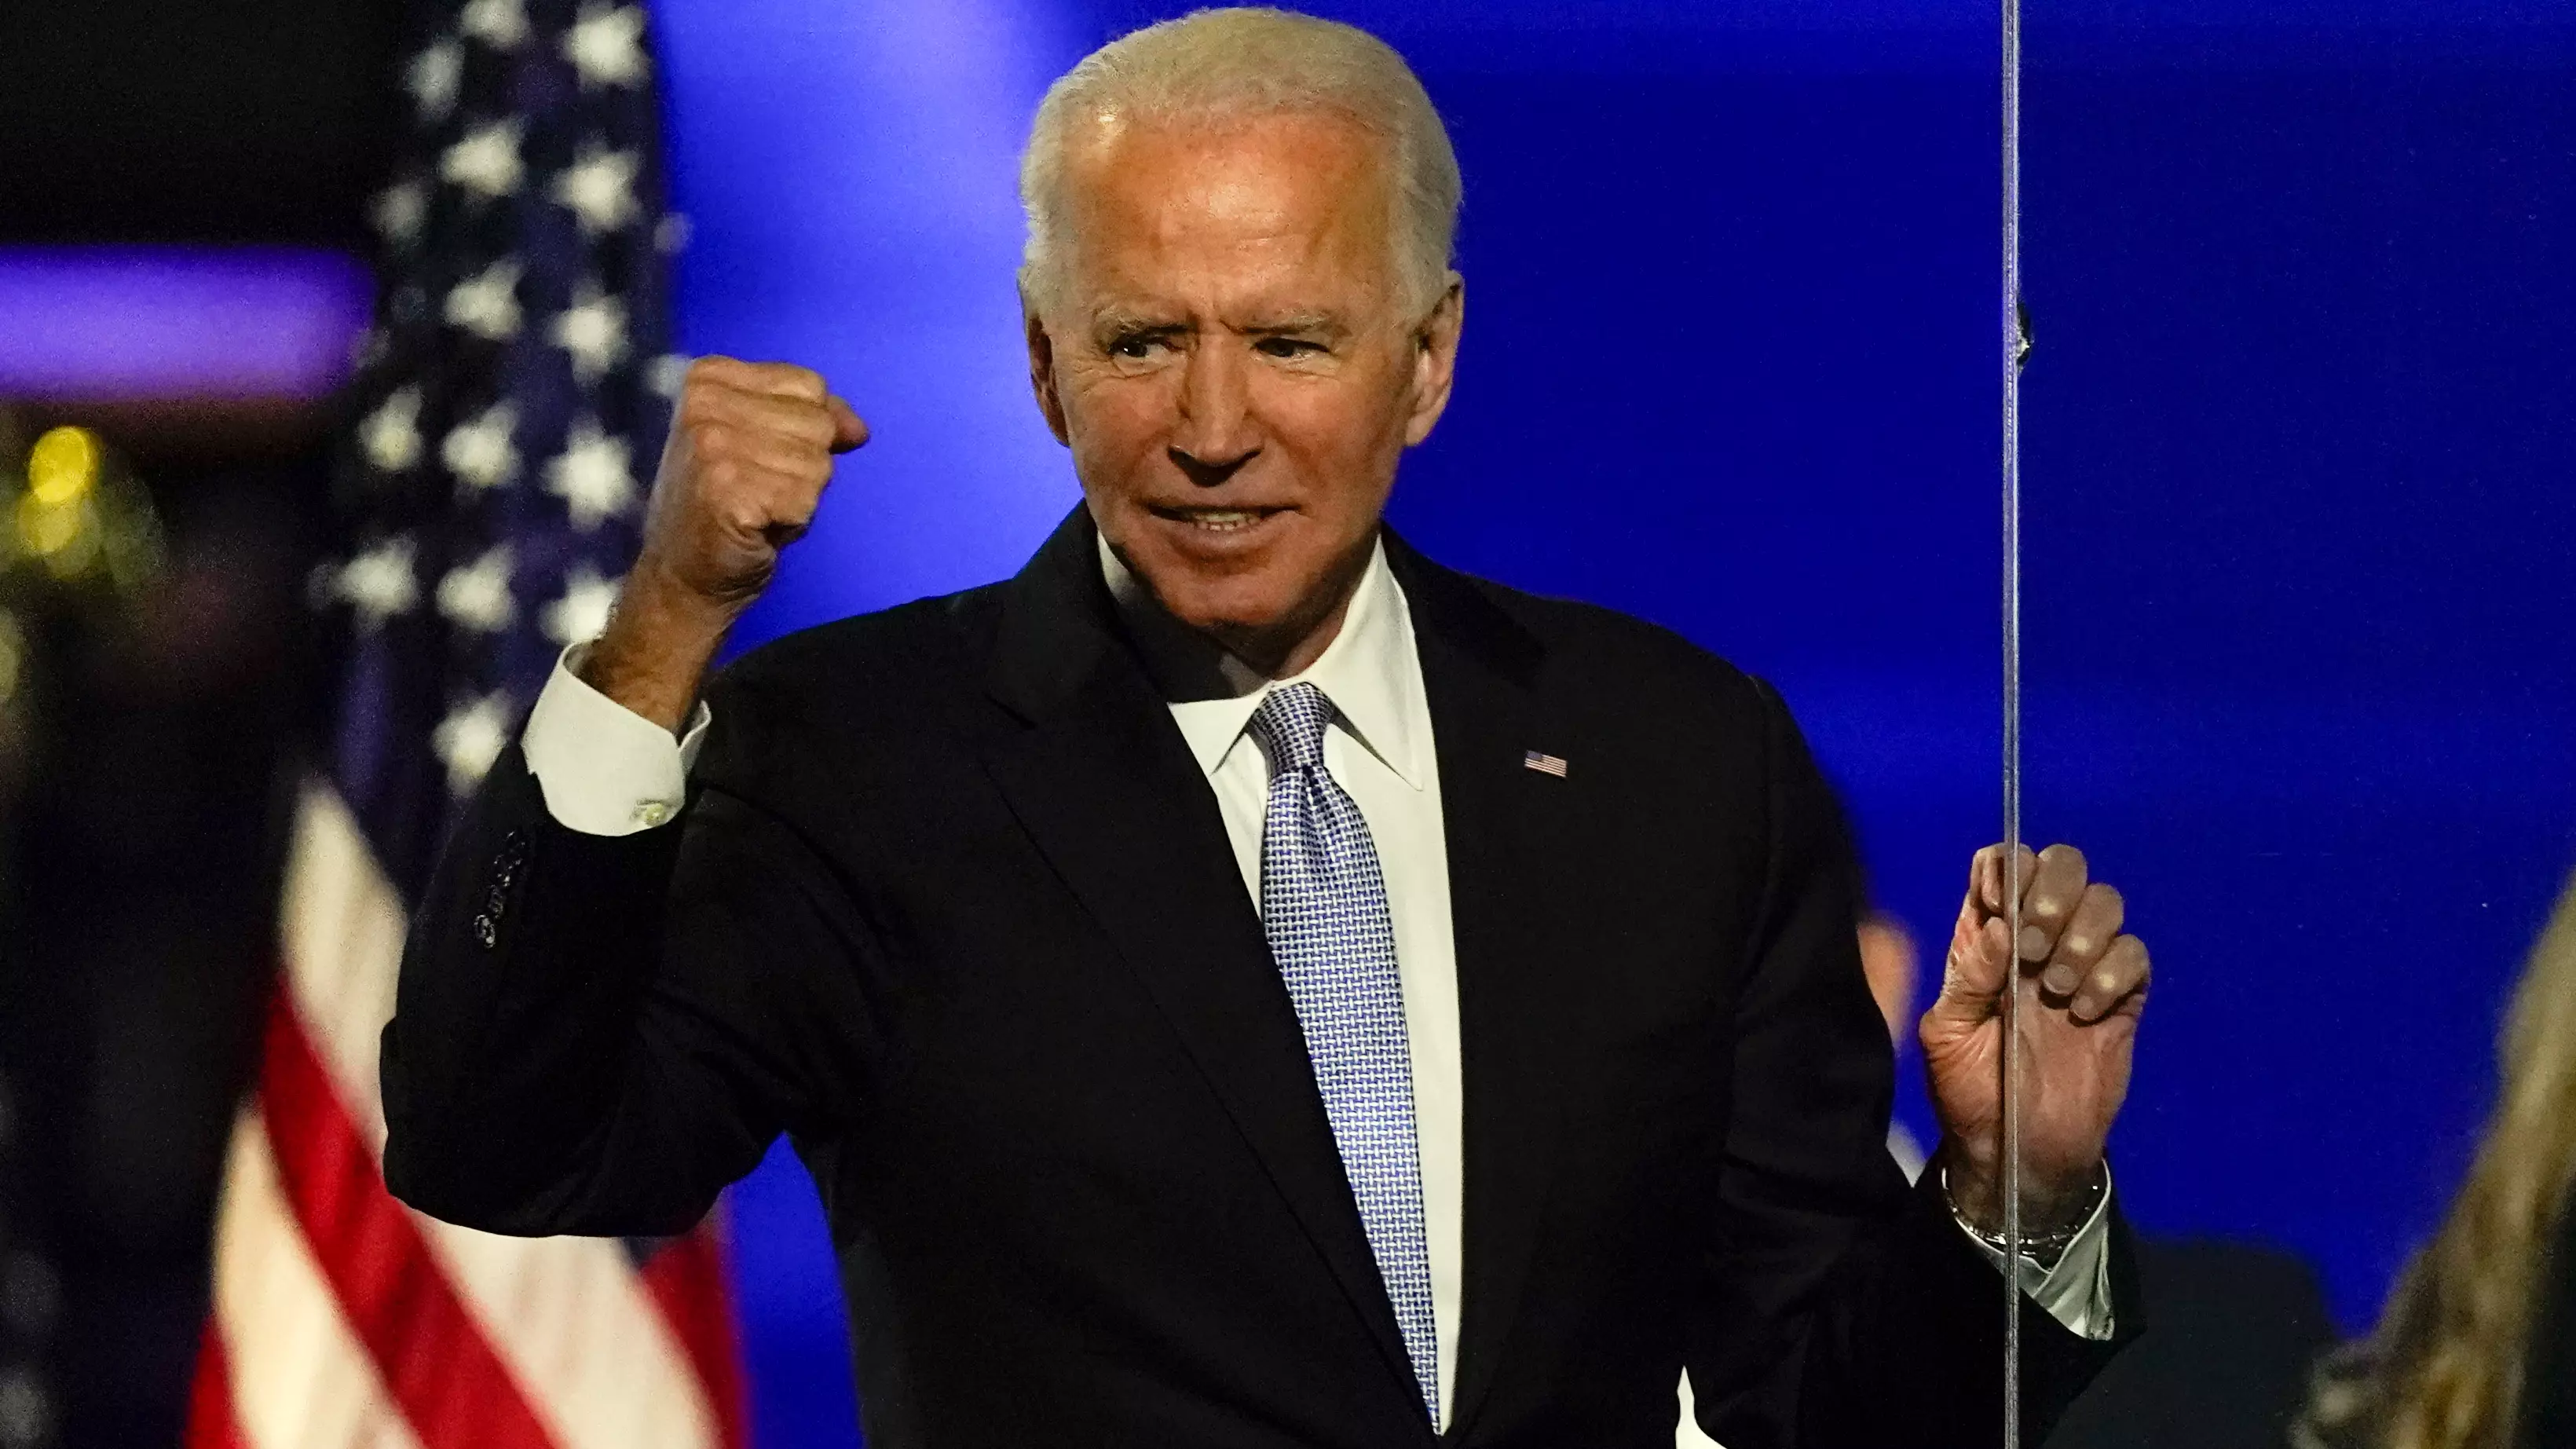 Joe Biden's 2014 Memo To Staff About Their Family Time Goes Viral